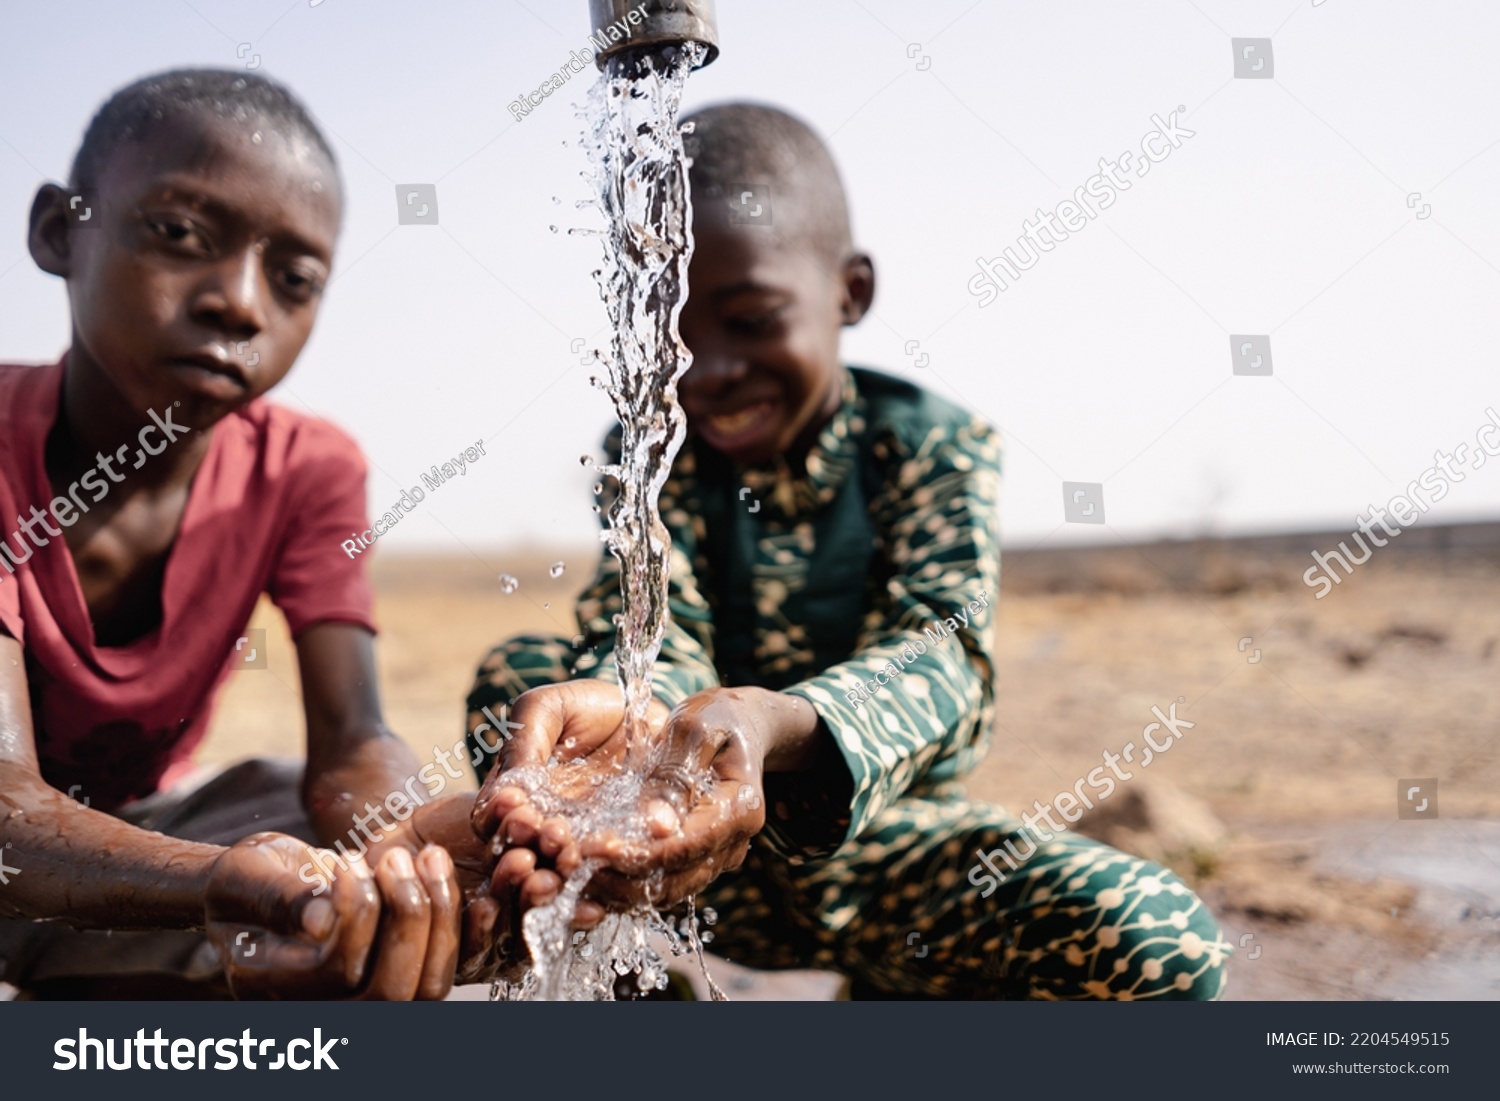 Two African toddlers playing with the water that flows from a rural faucet on the outskirts of their village; concept of water scarcity #2204549515